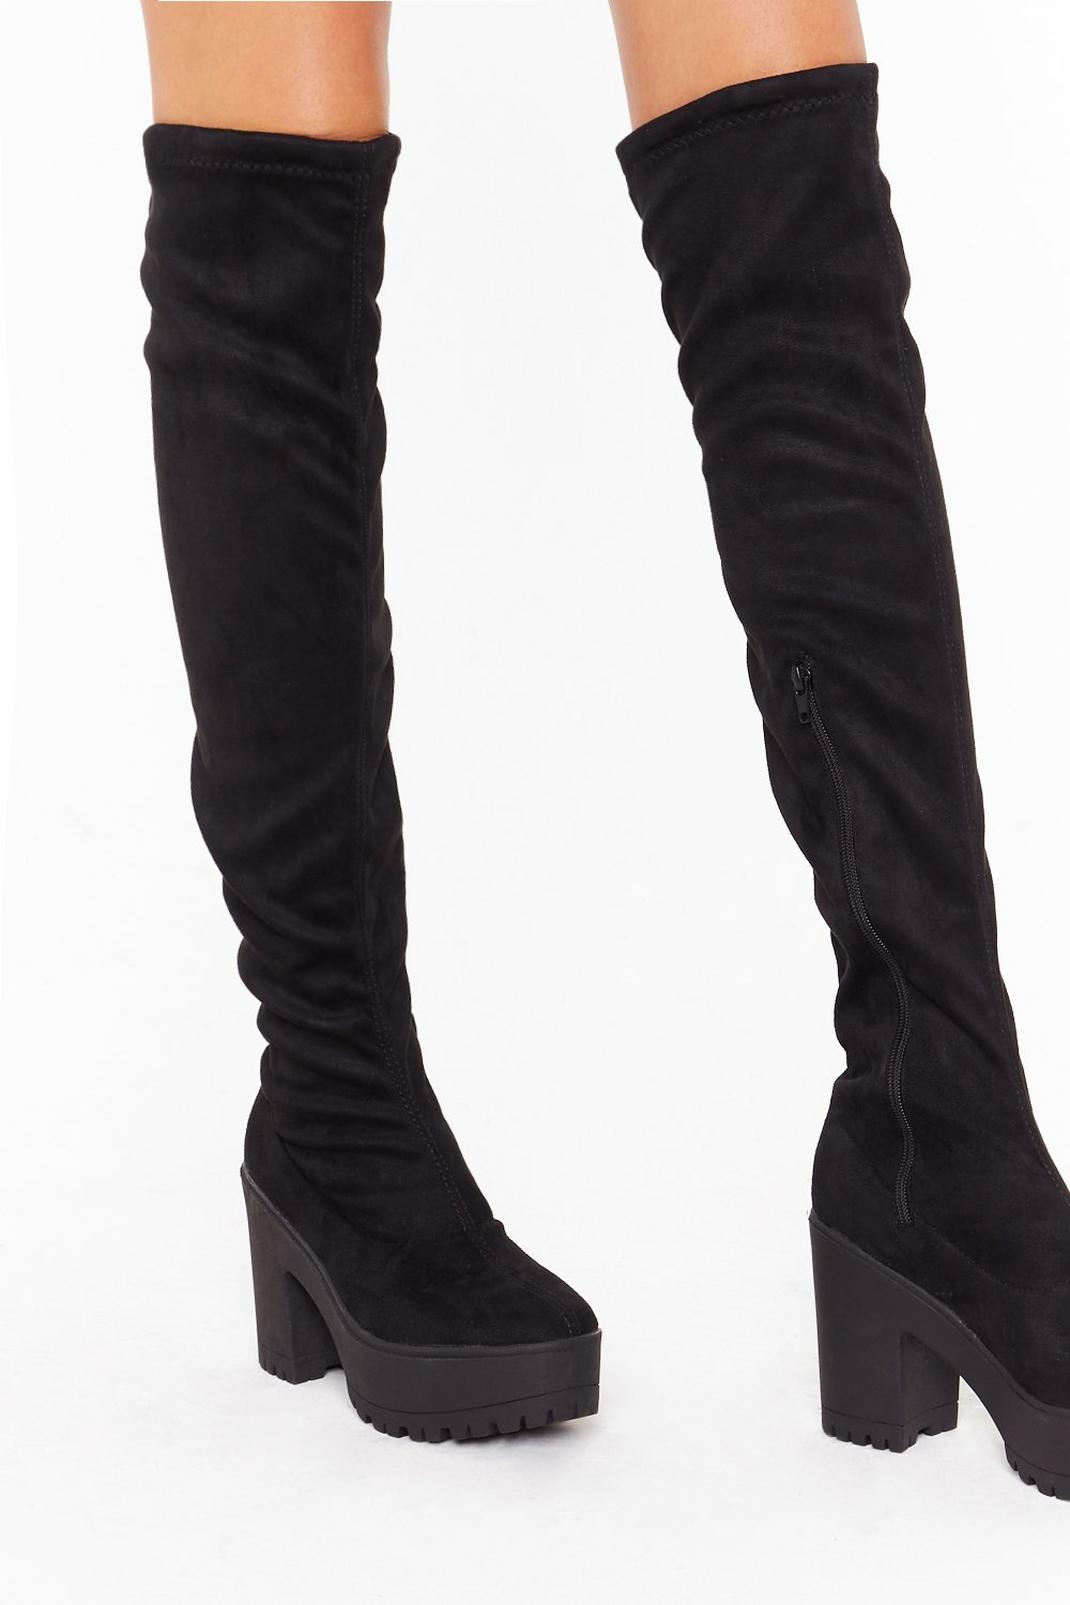 Suede Me Love Faux Suede Over-the-Knee Boots | Nasty Gal